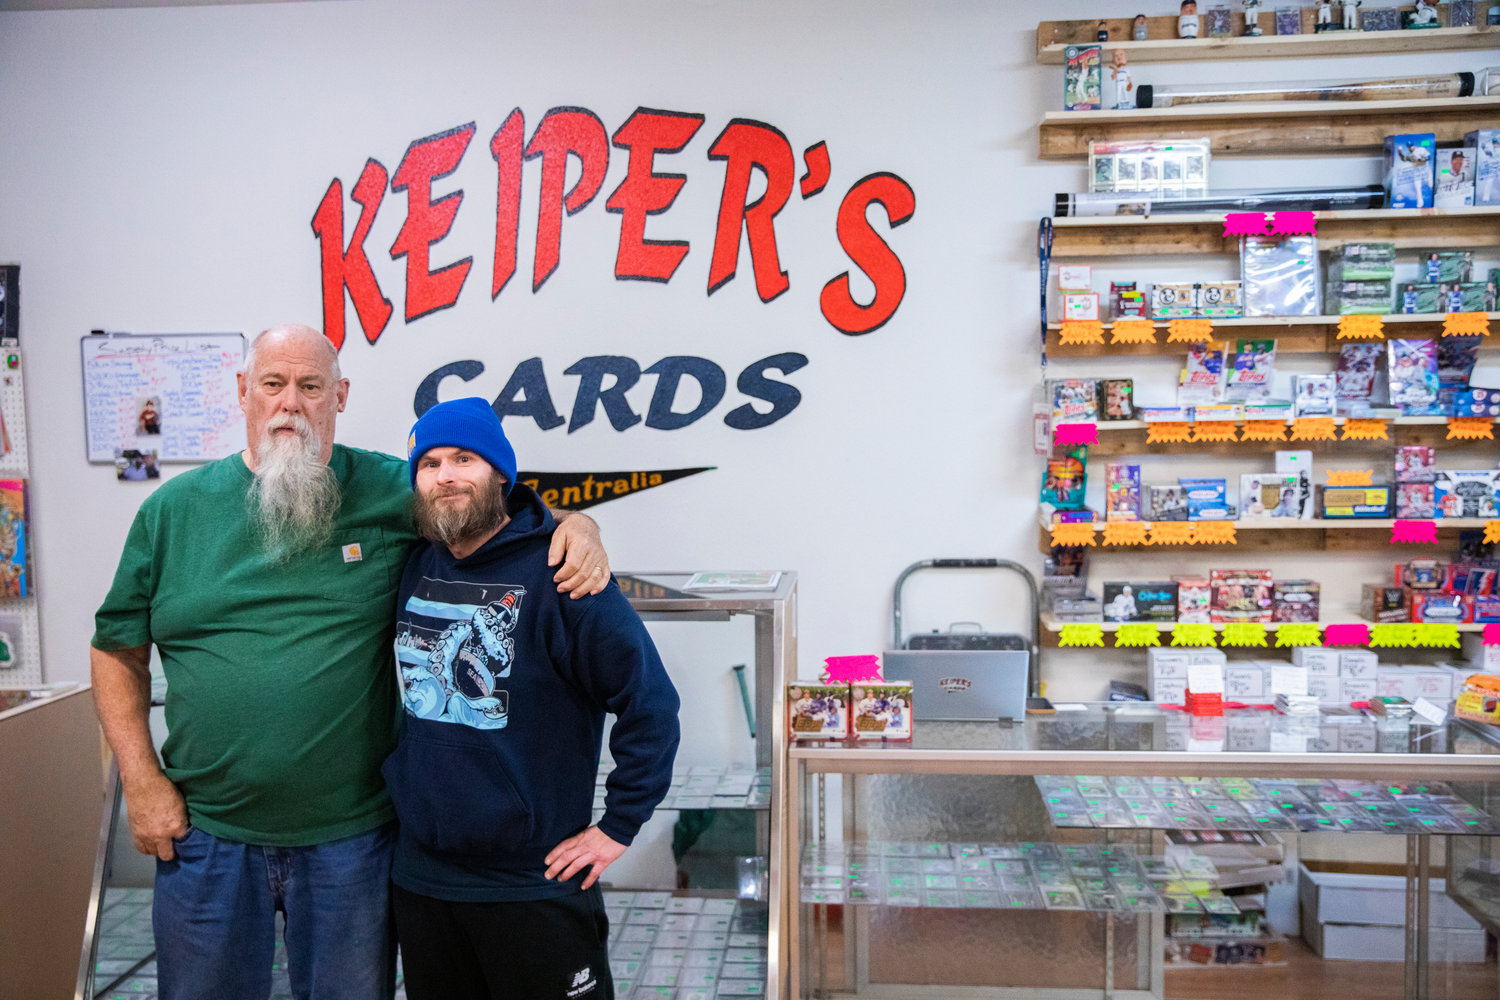 FILE PHOTO — Charlie Redmon and Dan Keiper pose for a photo inside Keiper’s Cards in downtown Centralia last year.